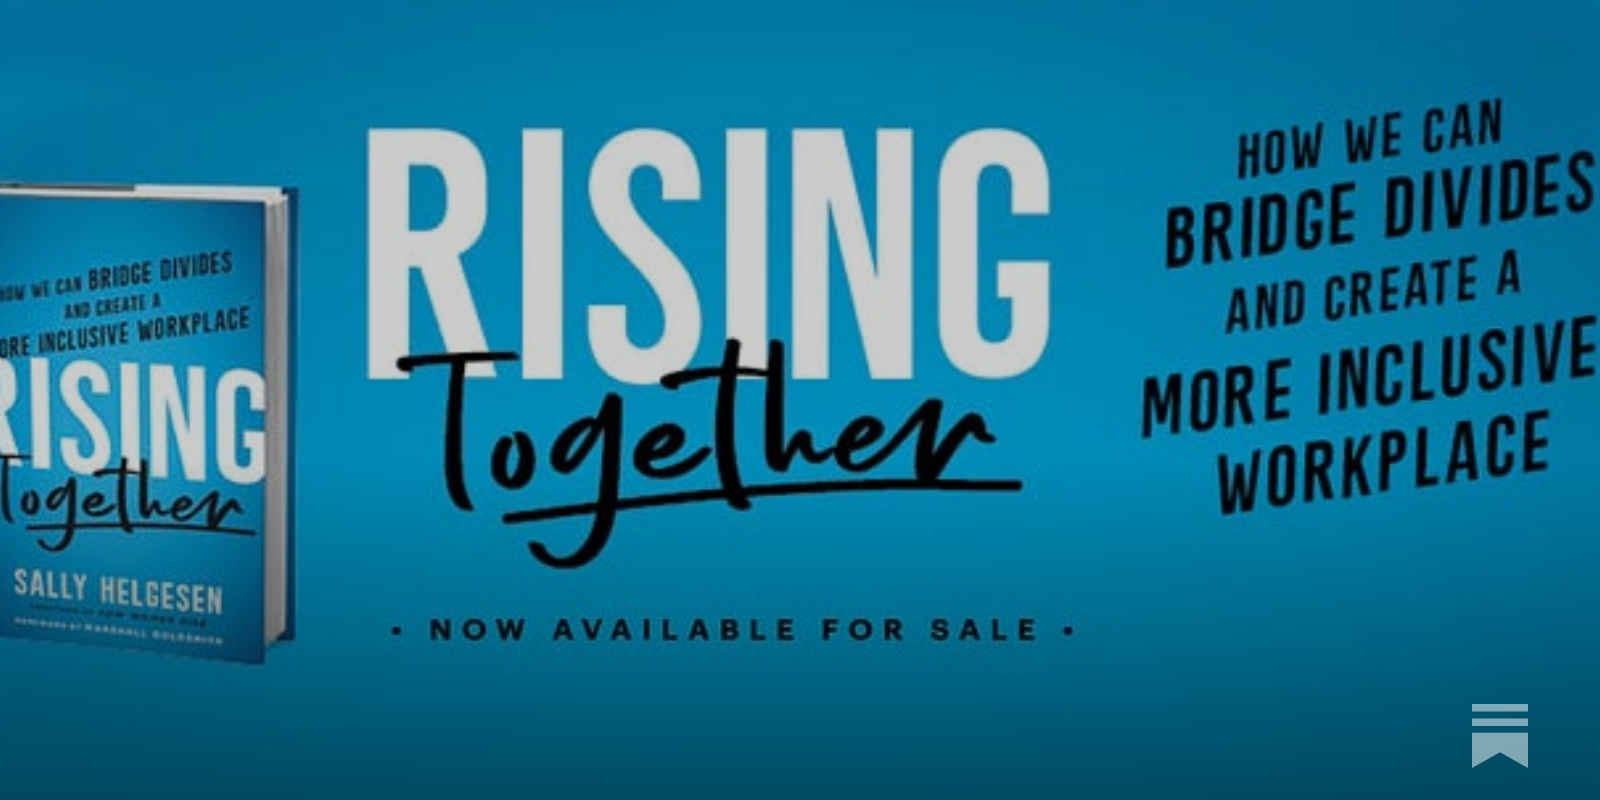 Rising Together by Sally Helgesen